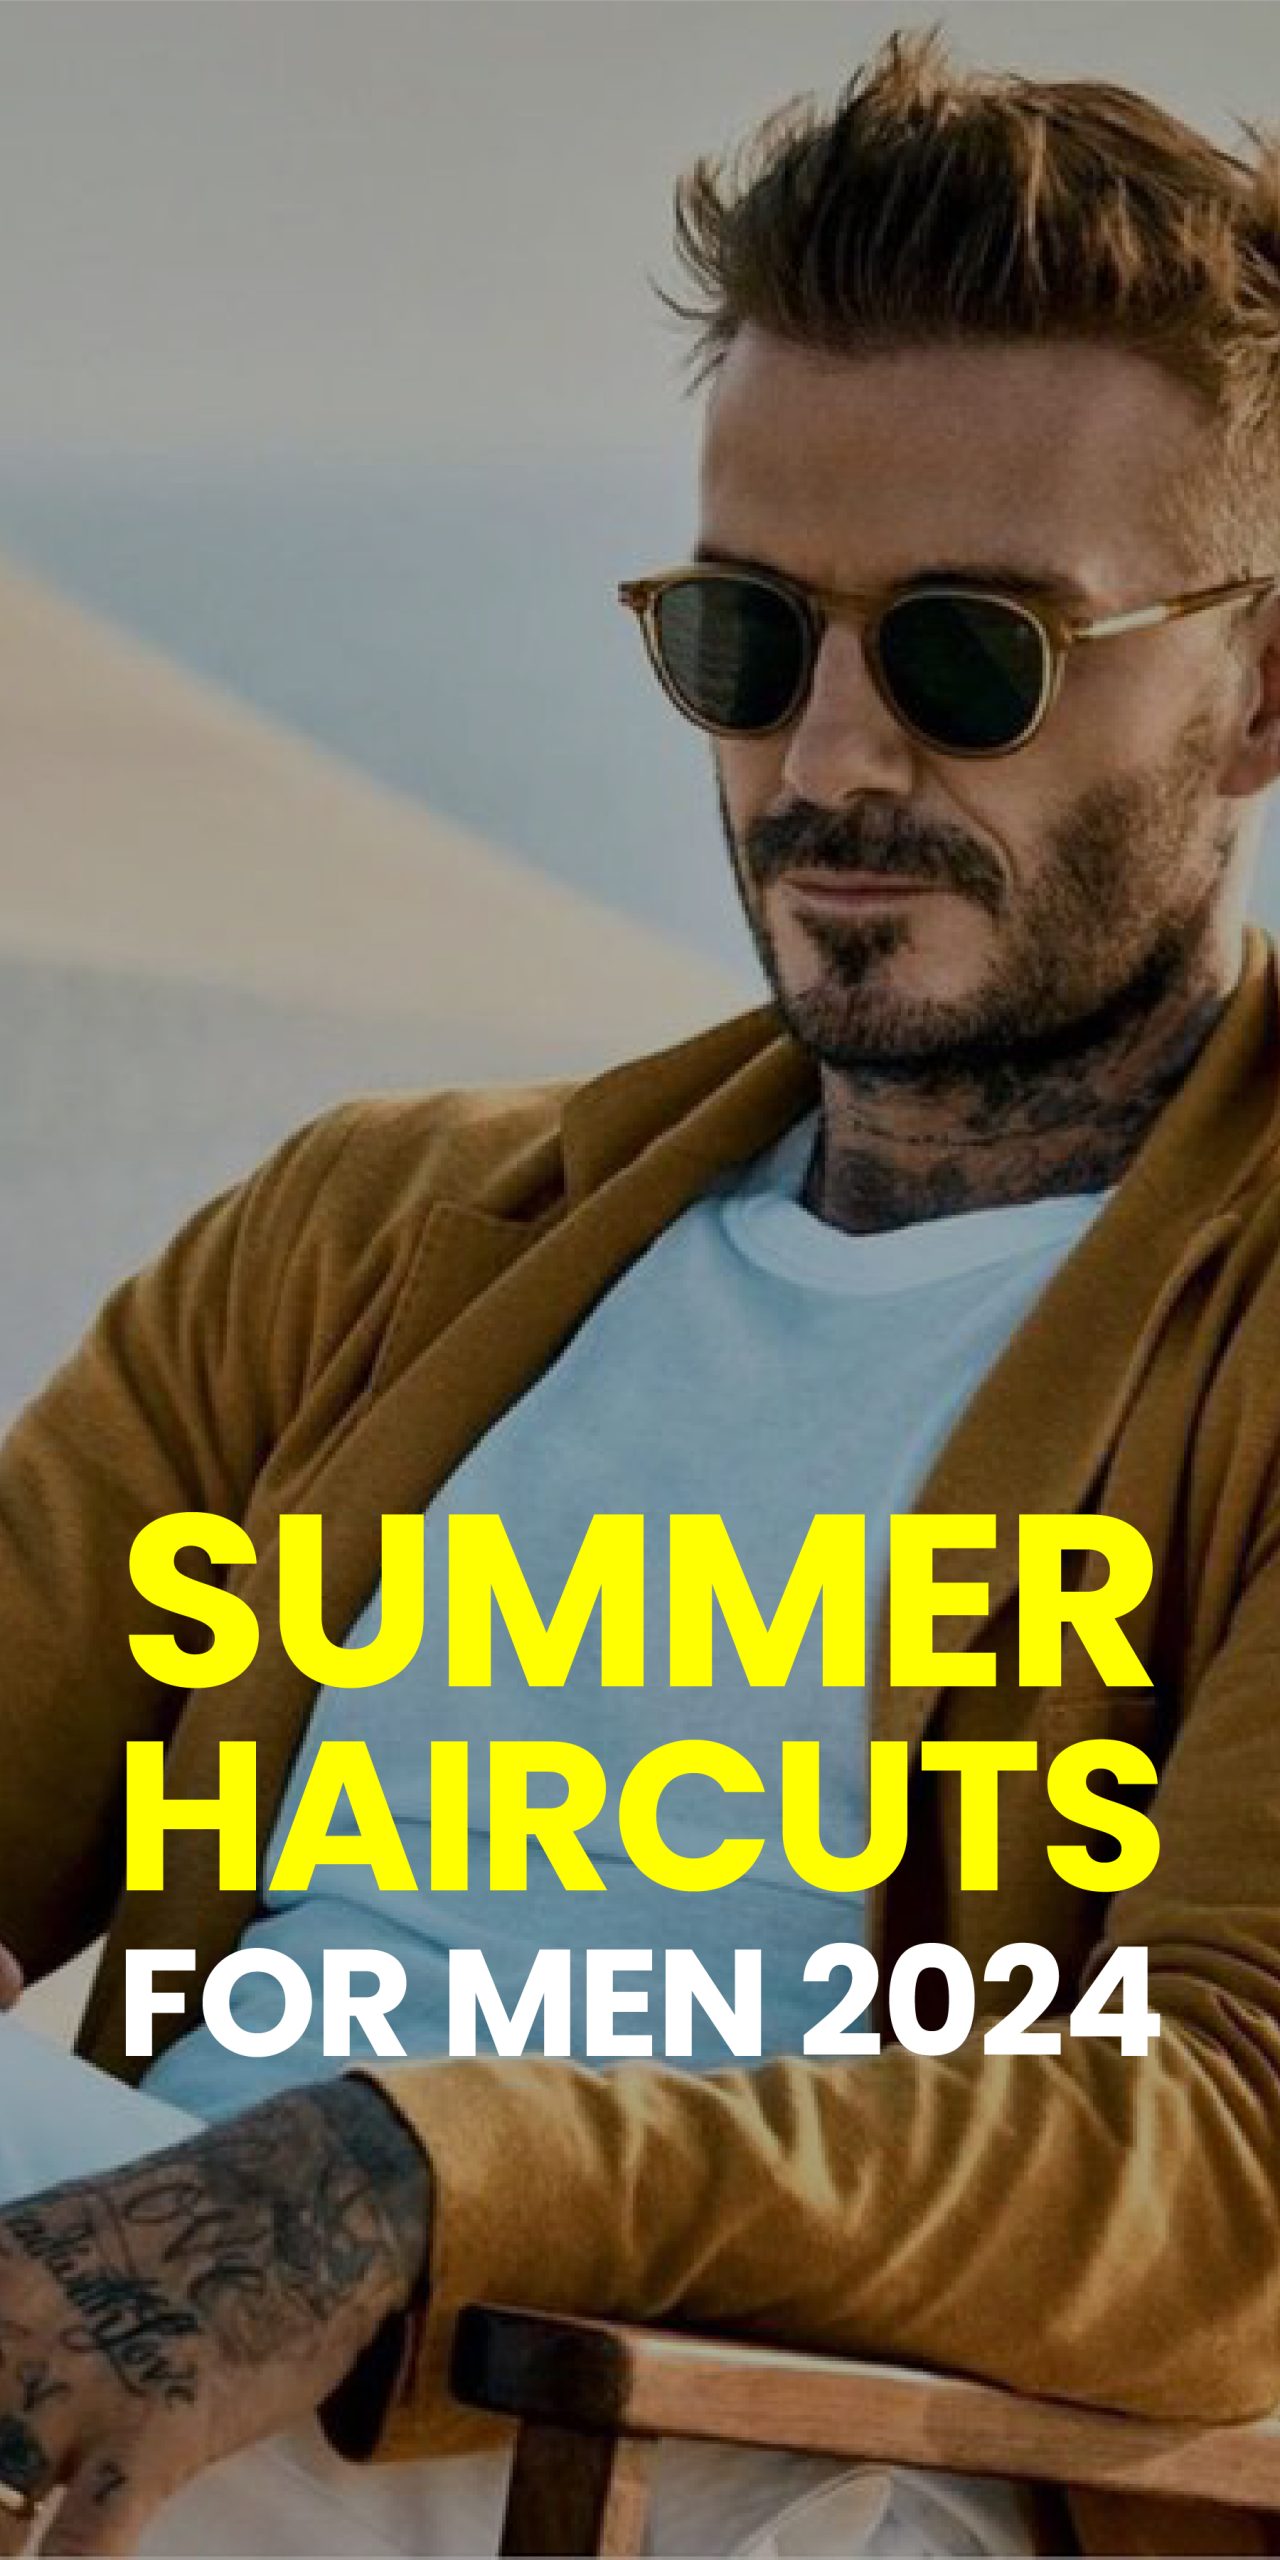 SUMMER HAIRCUTS FOR MEN 2024